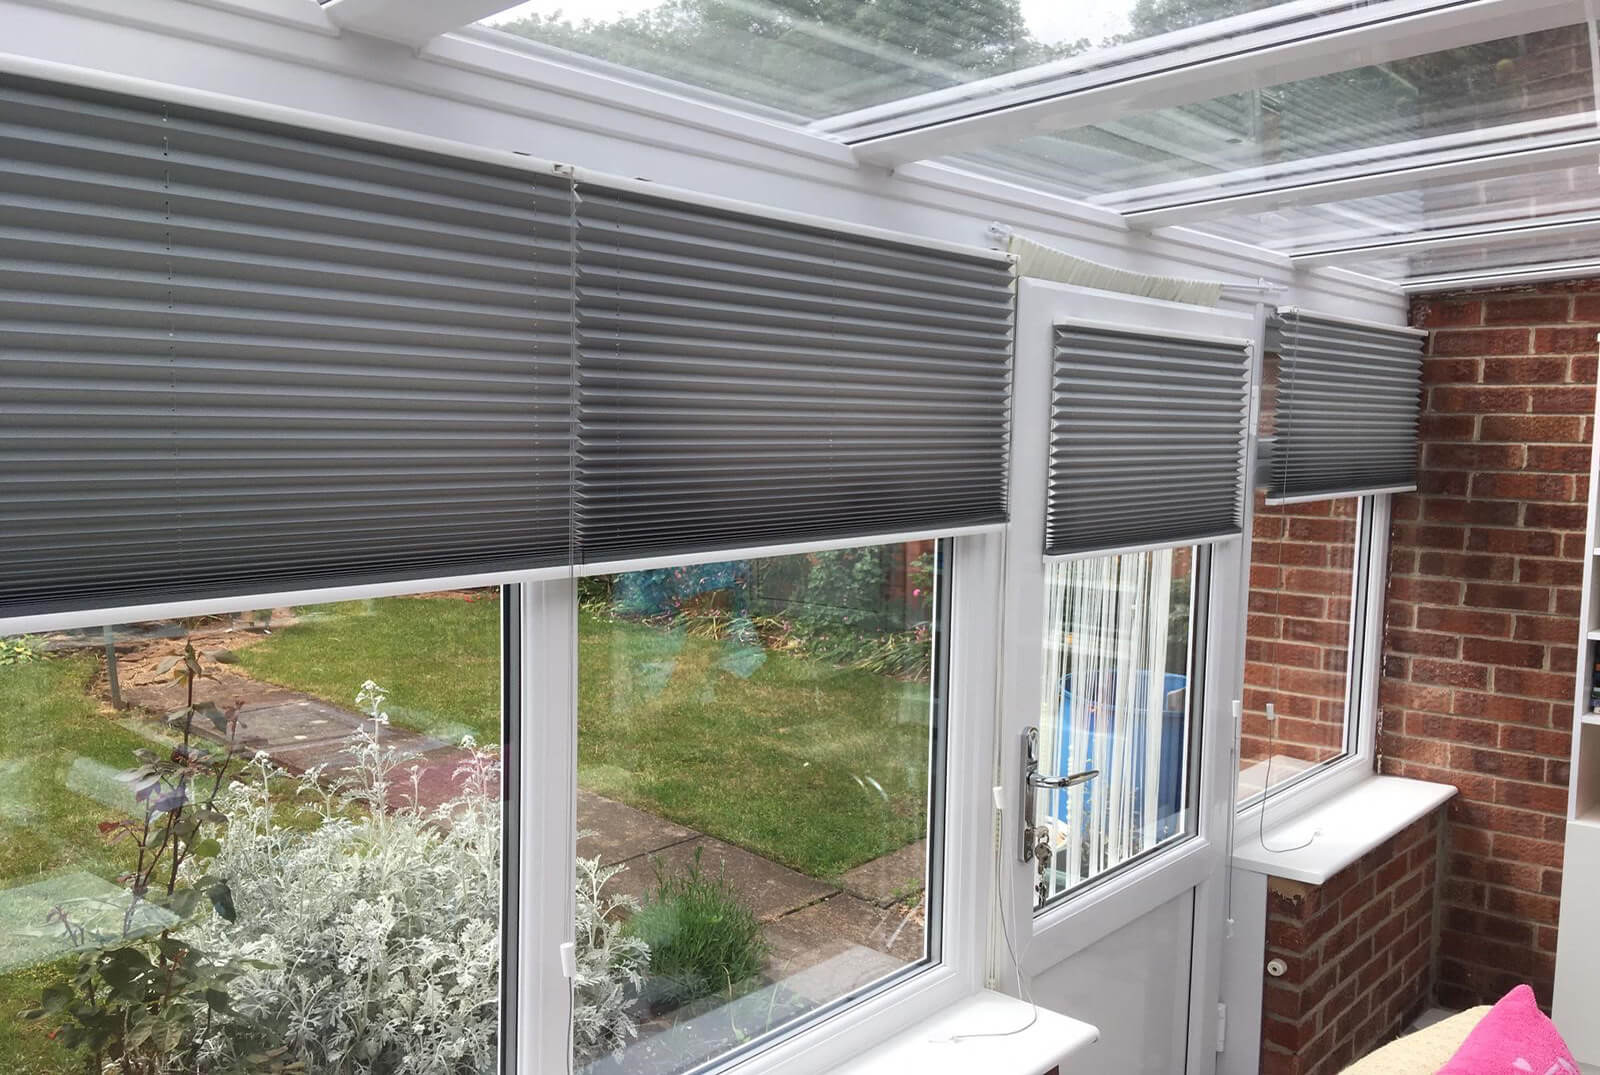 Suppliers of Neatly Folding Pleated Blinds UK